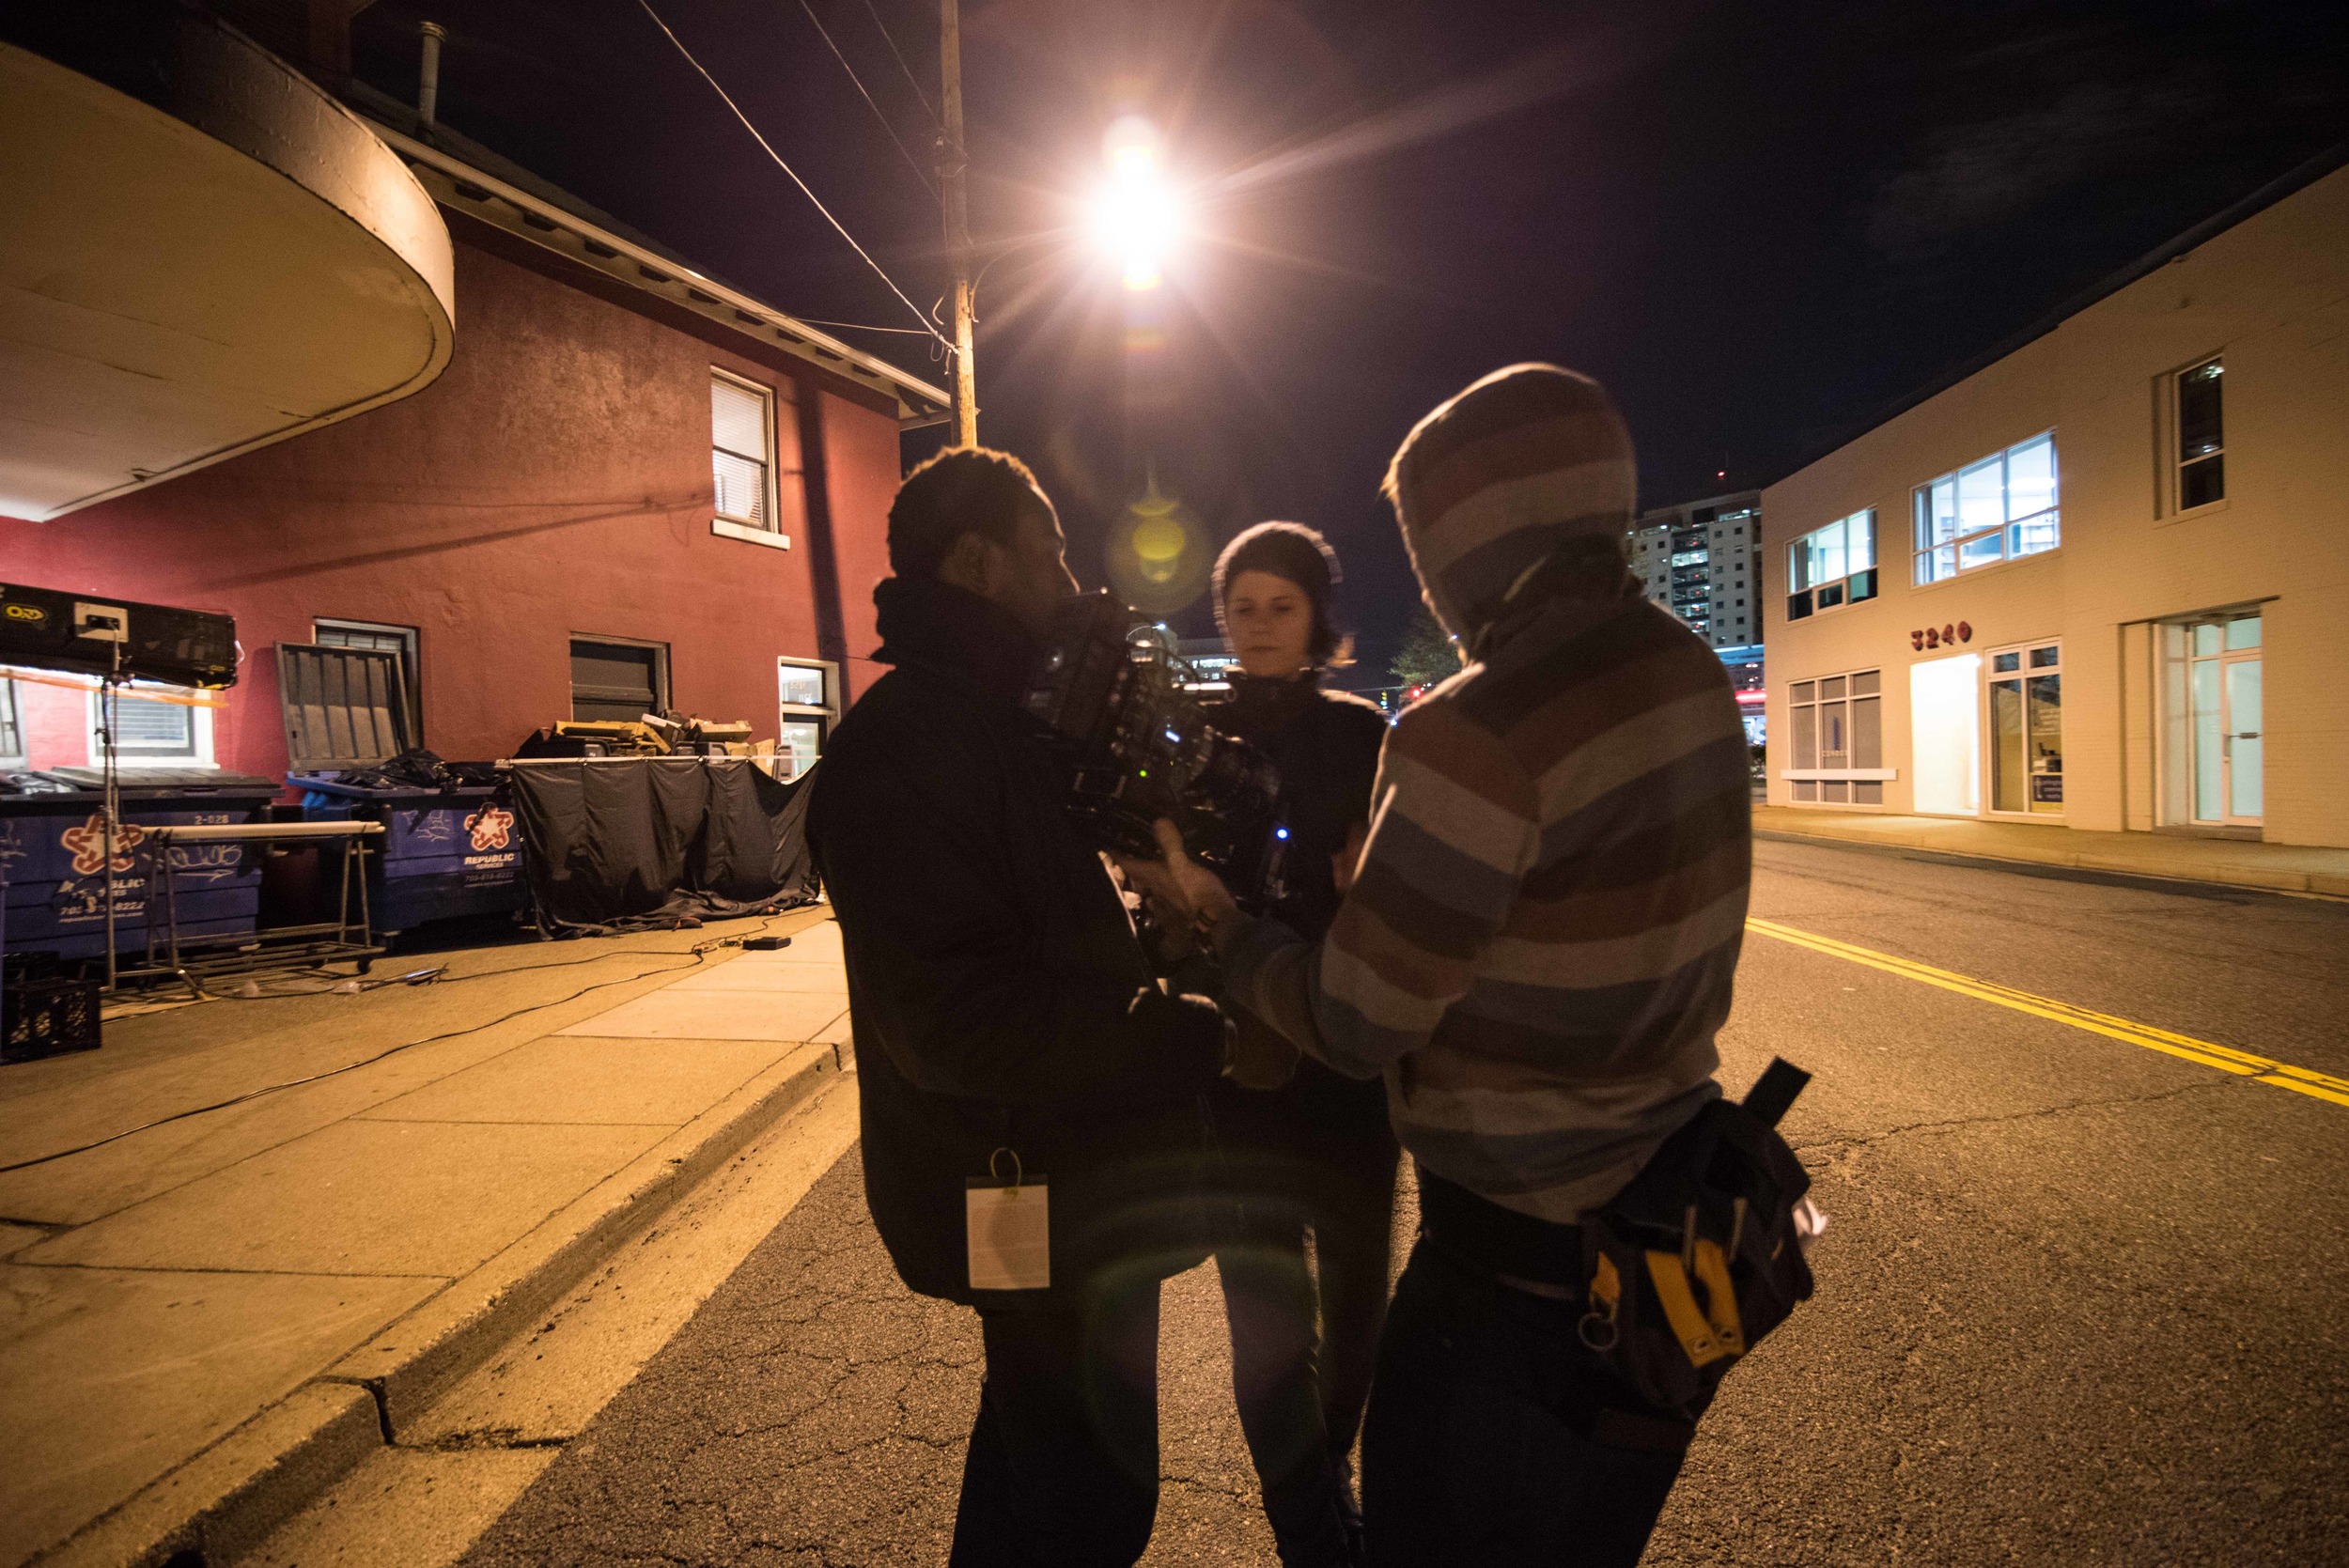  Cinematographer Hans Charles, Director Giovanna Chesler, AC Cameron Perrier get ready for the next take in JAVA the short. Image Dixie D. Vereen. 